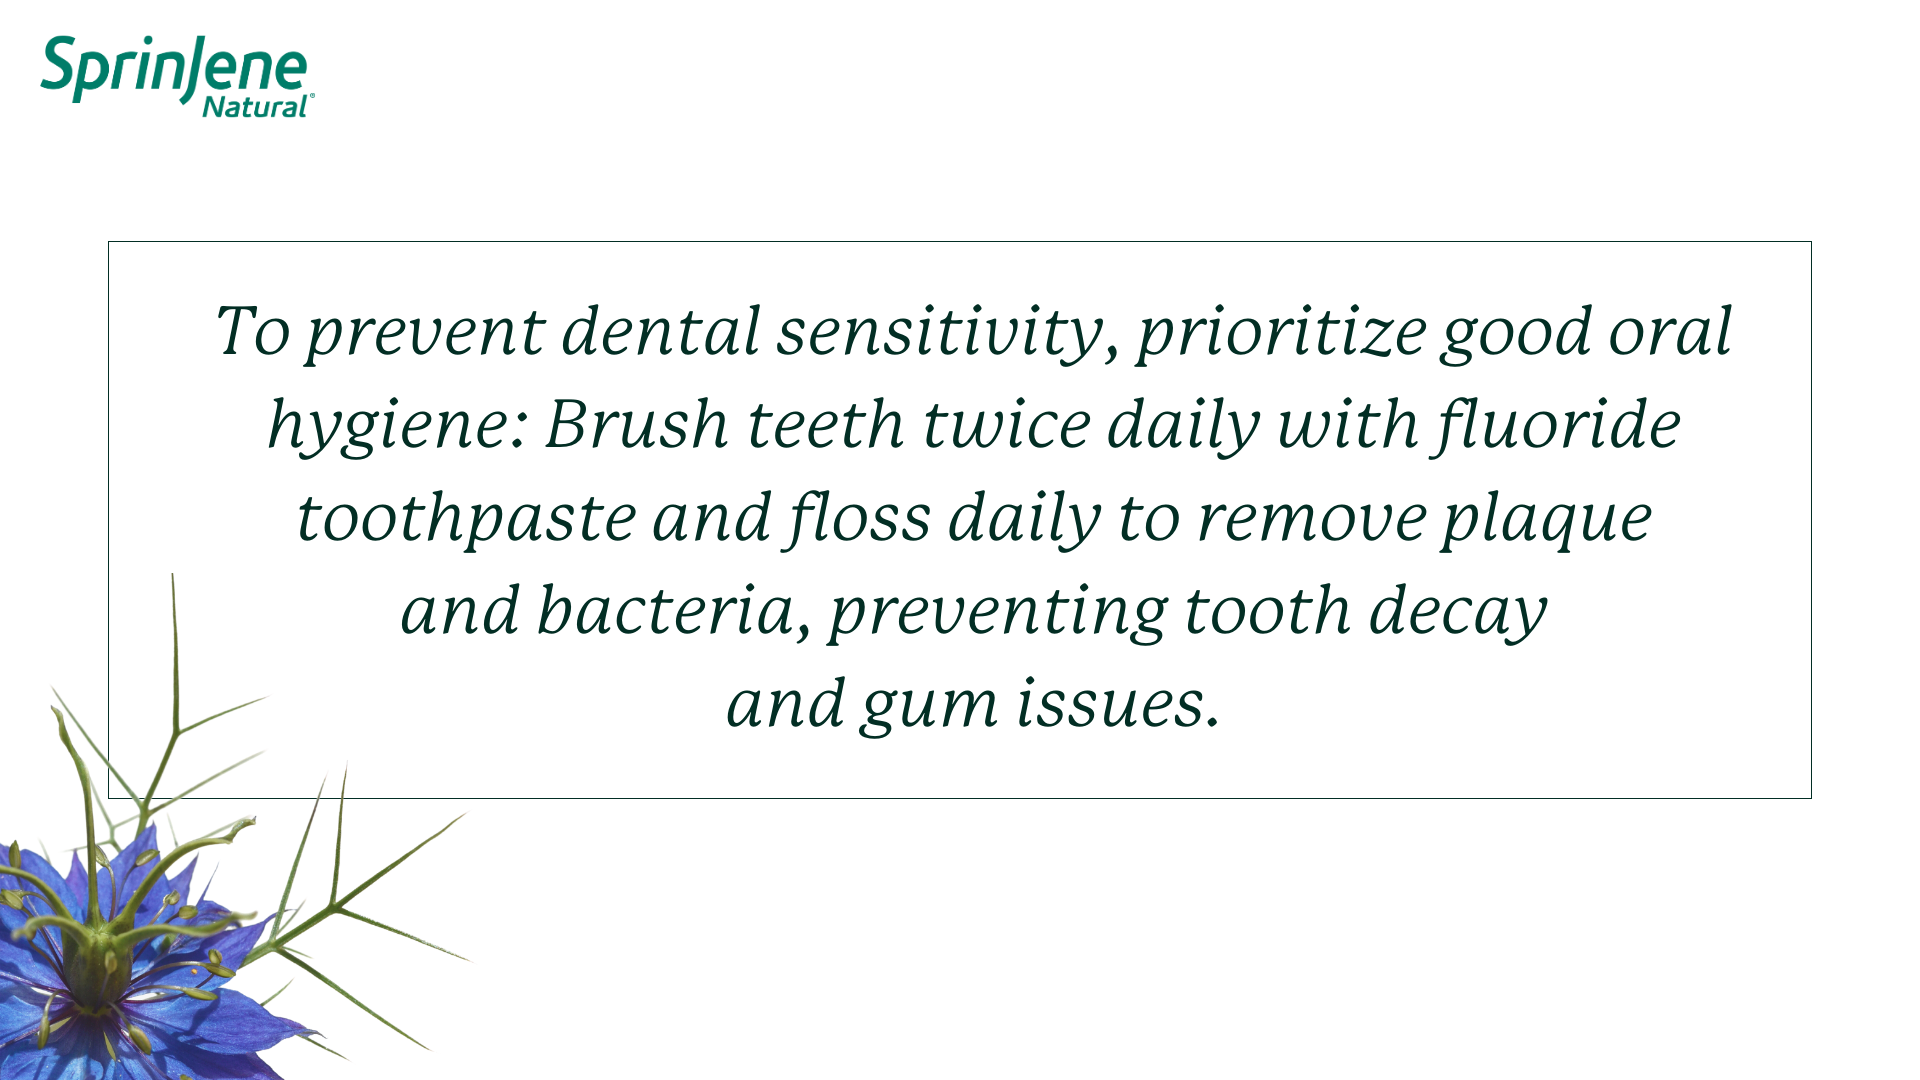 To prevent dental sensitivity, prioritize good oral hygiene: Brush teeth twice daily with fluoride toothpaste and floss daily to remove plaque and bacteria, preventing tooth decay and gum issues.